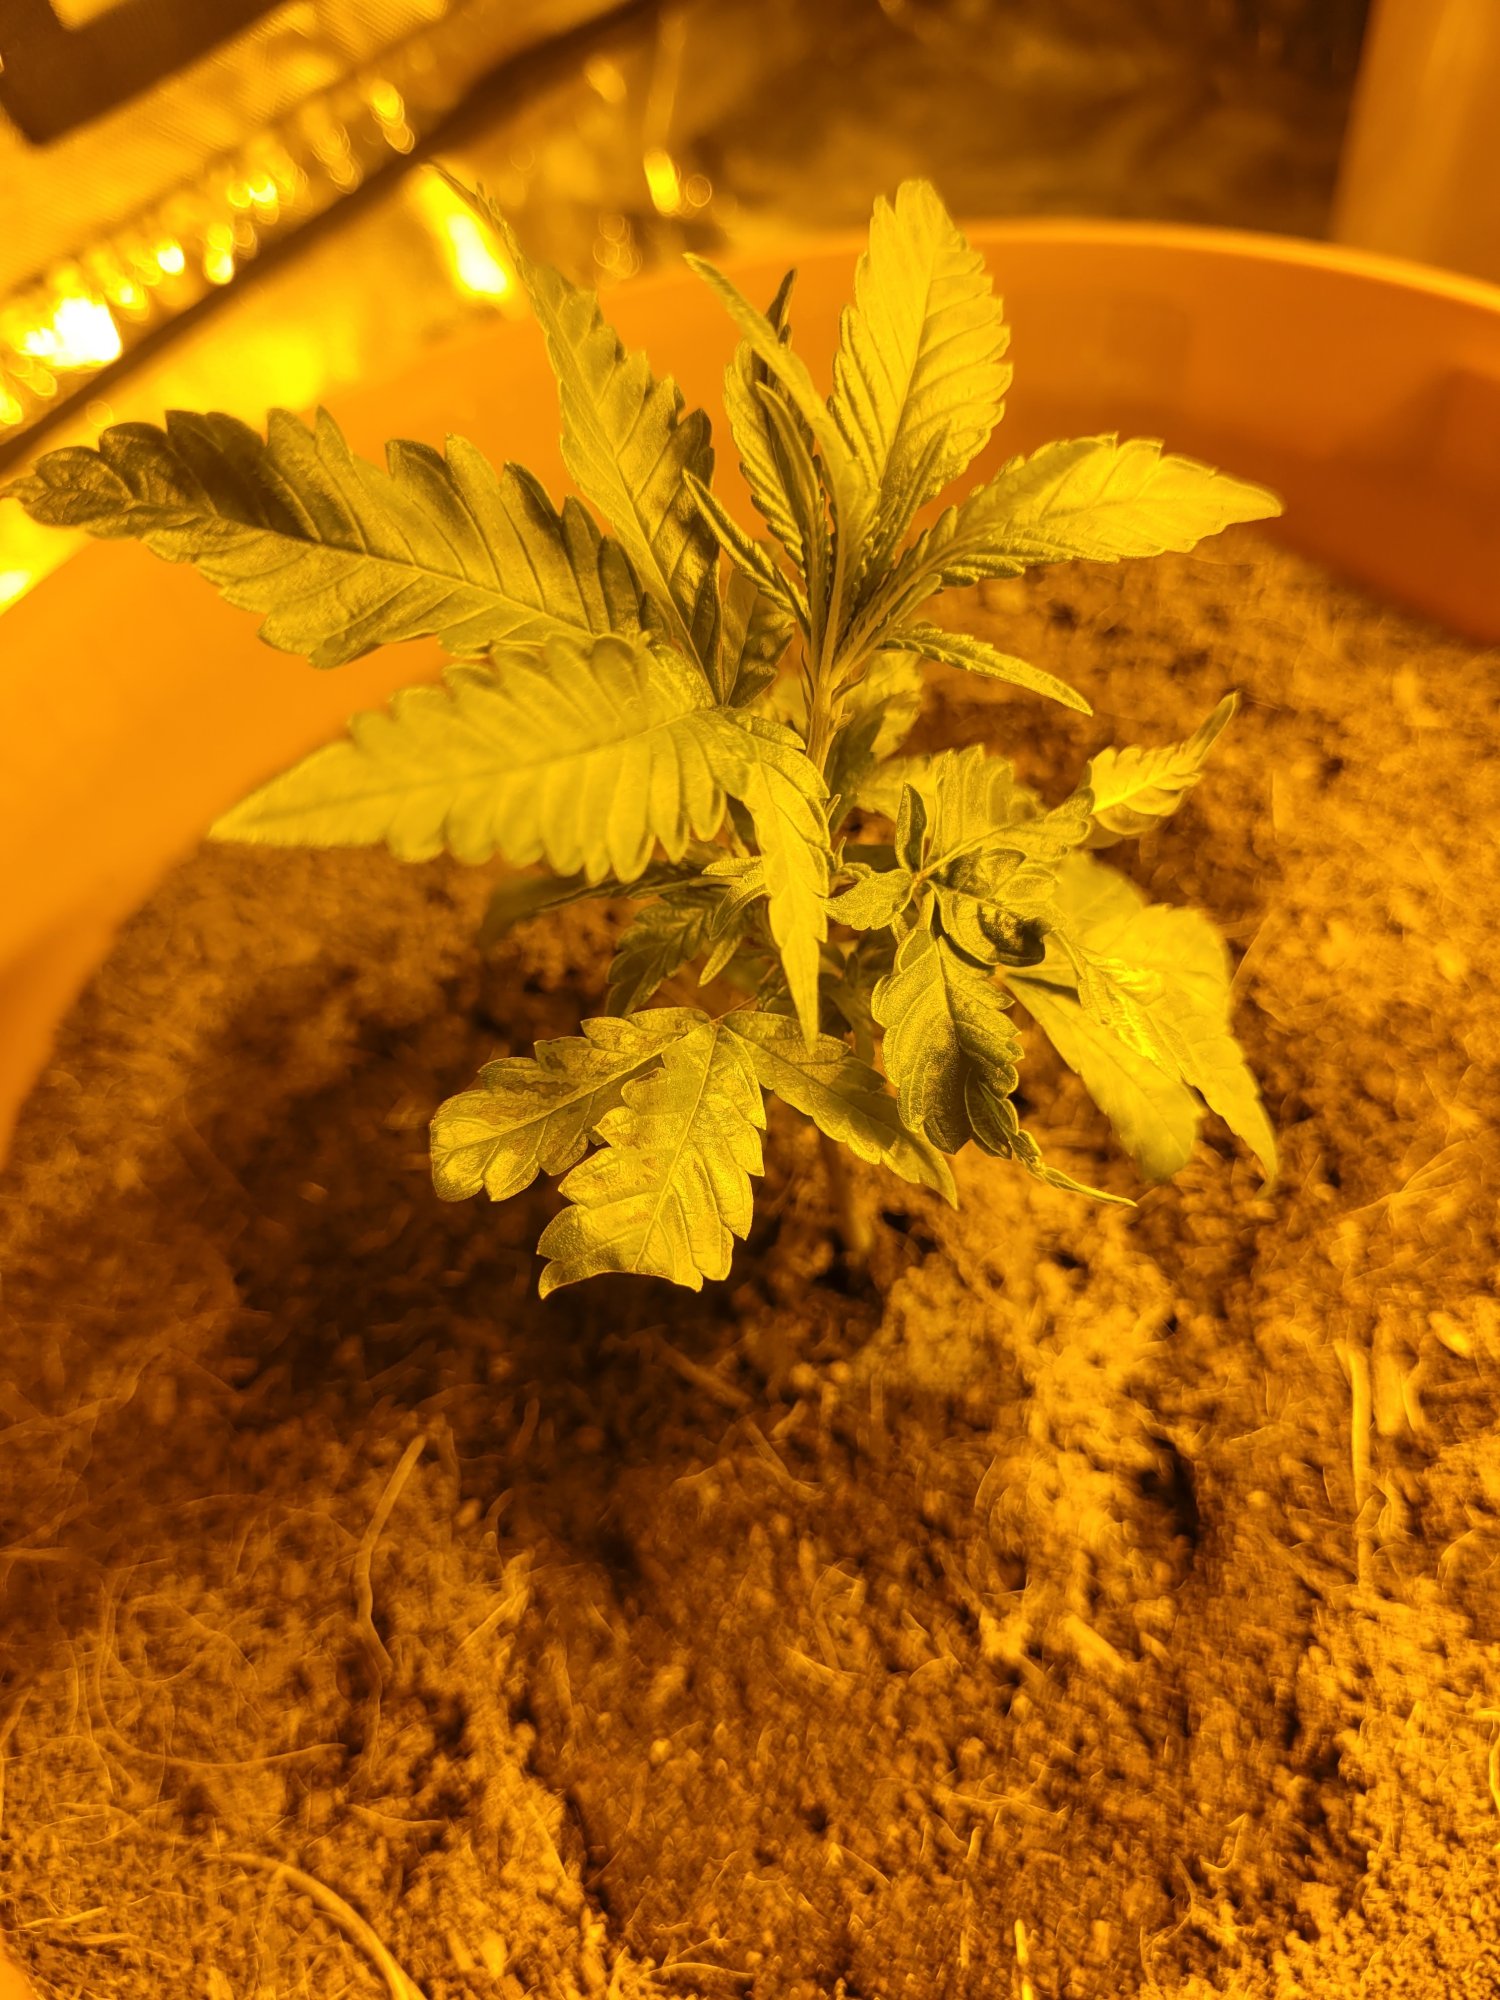 Help new to growing no idea 2